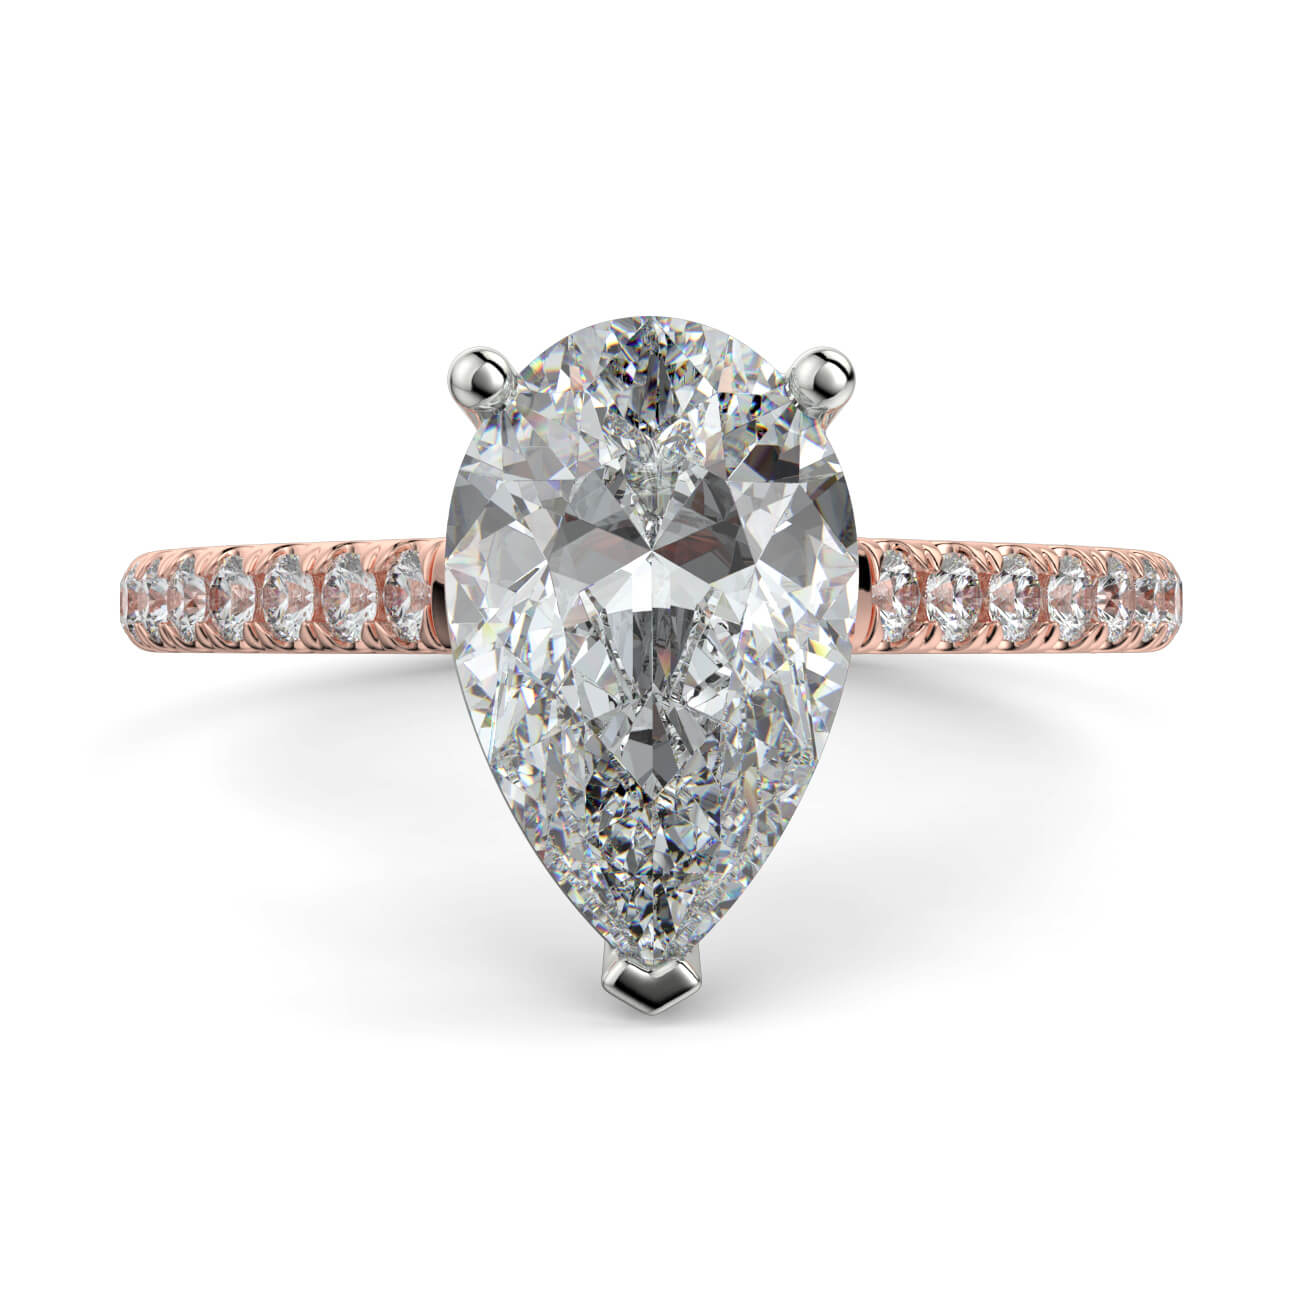 Pear shape diamond cathedral engagement ring in rose and white gold – Australian Diamond Network